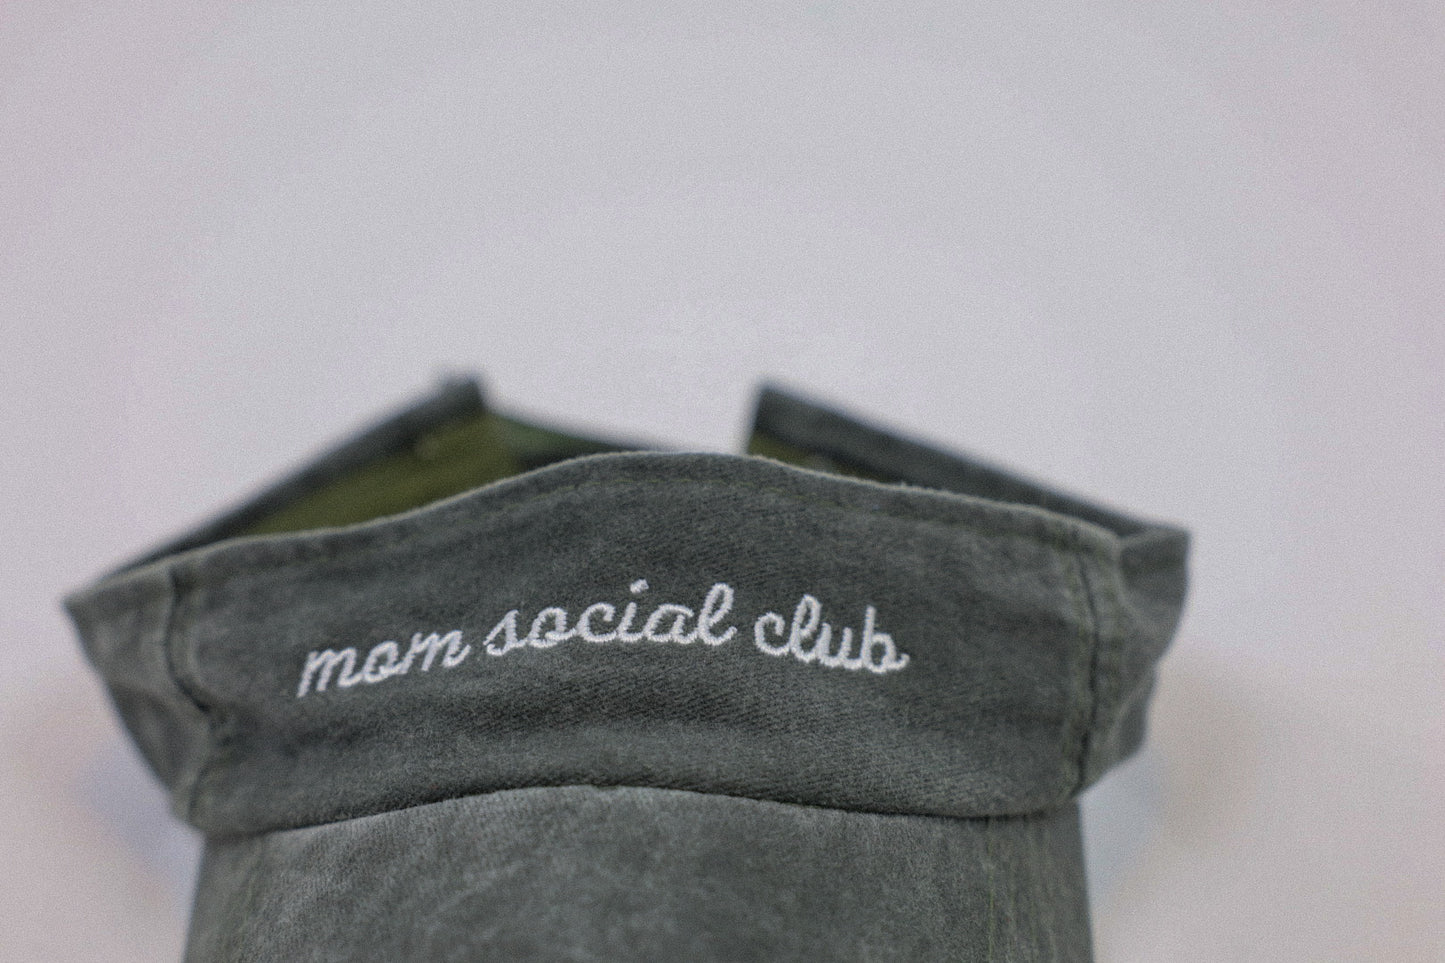 Washed and vintage style visor which is green with words mom social club on it.